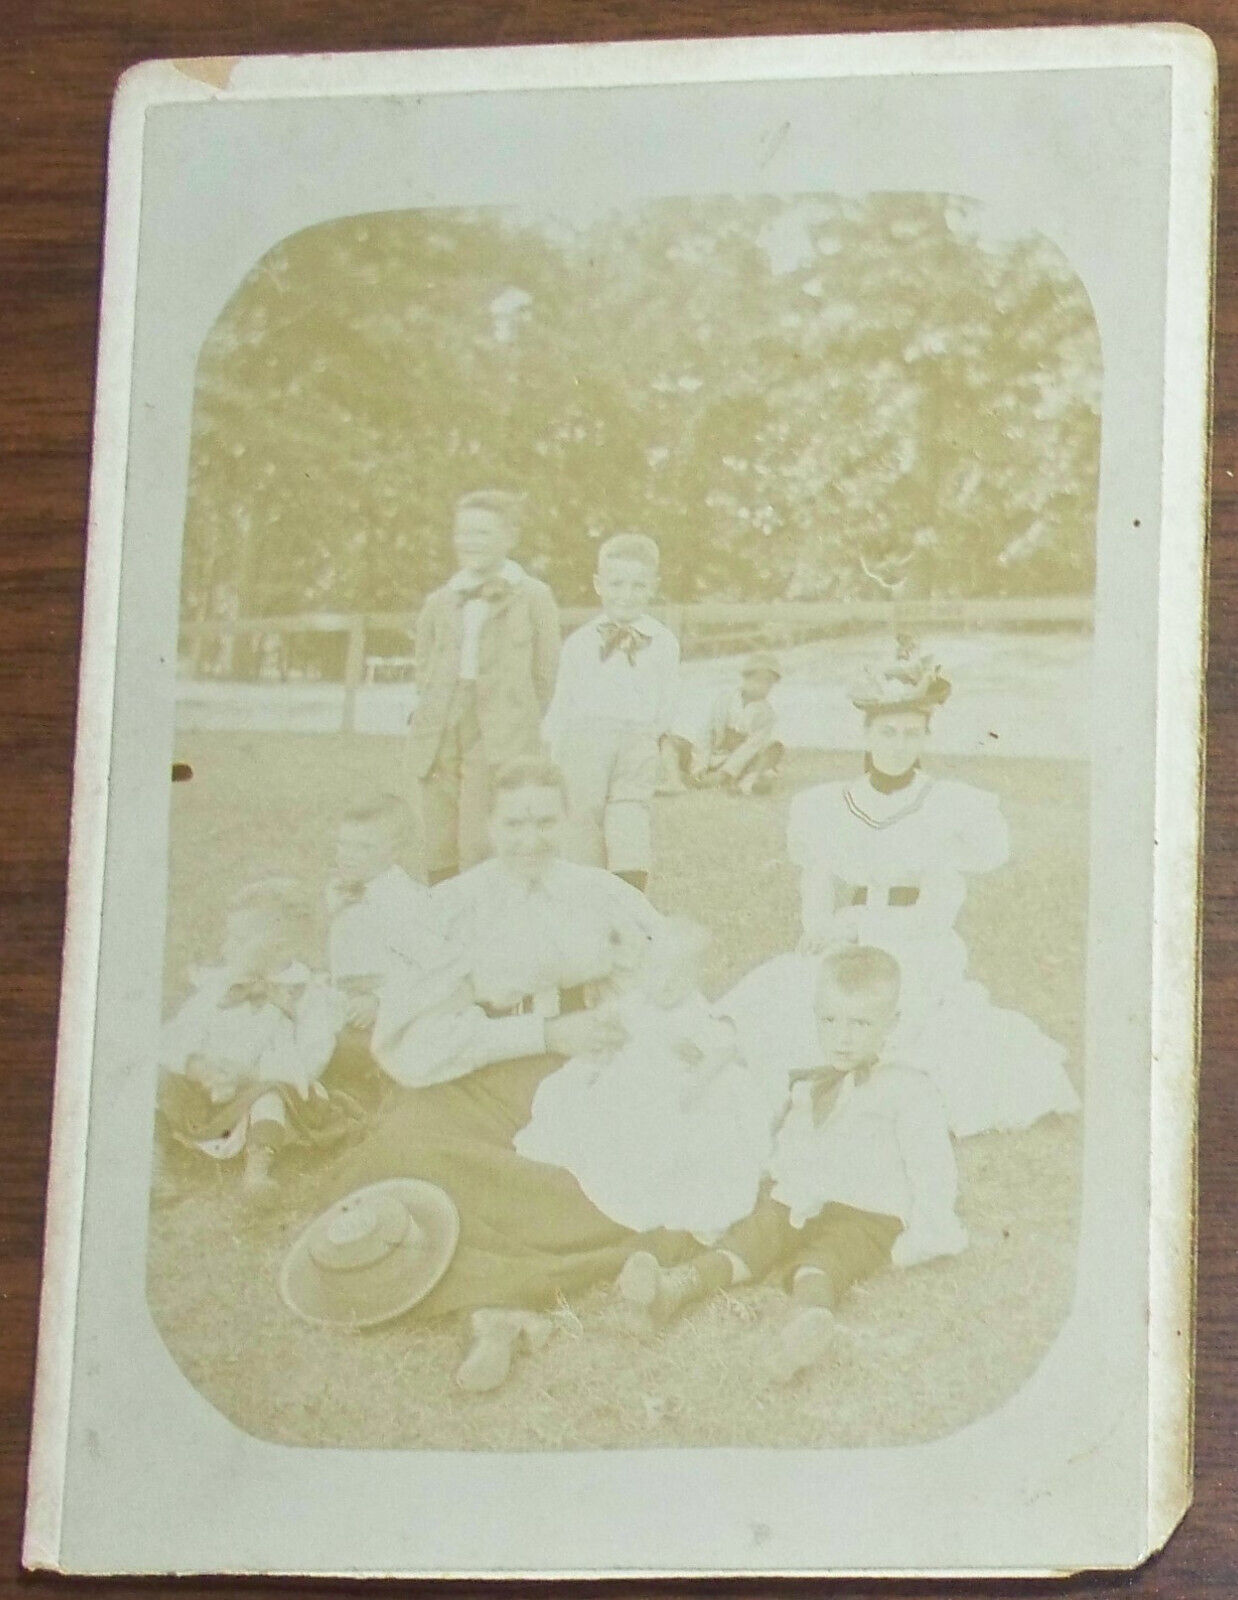 African American boy photo-bombing a caucasian group at a park cabinet photo